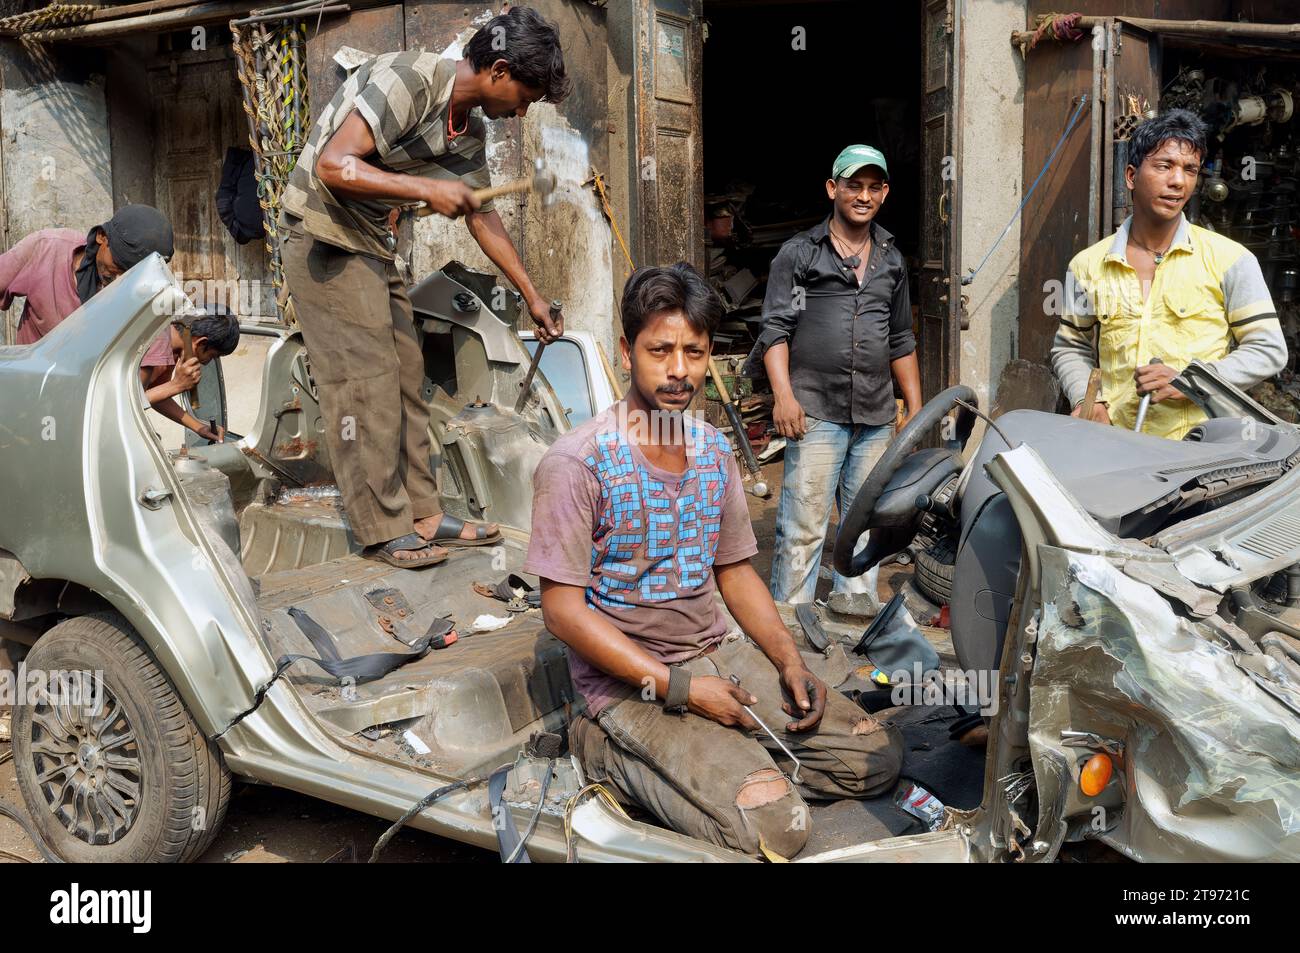 At Chor Bazar or Thieves' Market in Mumbai, India, a group of young men dismantle a car to sell for scrap and spare parts Stock Photo